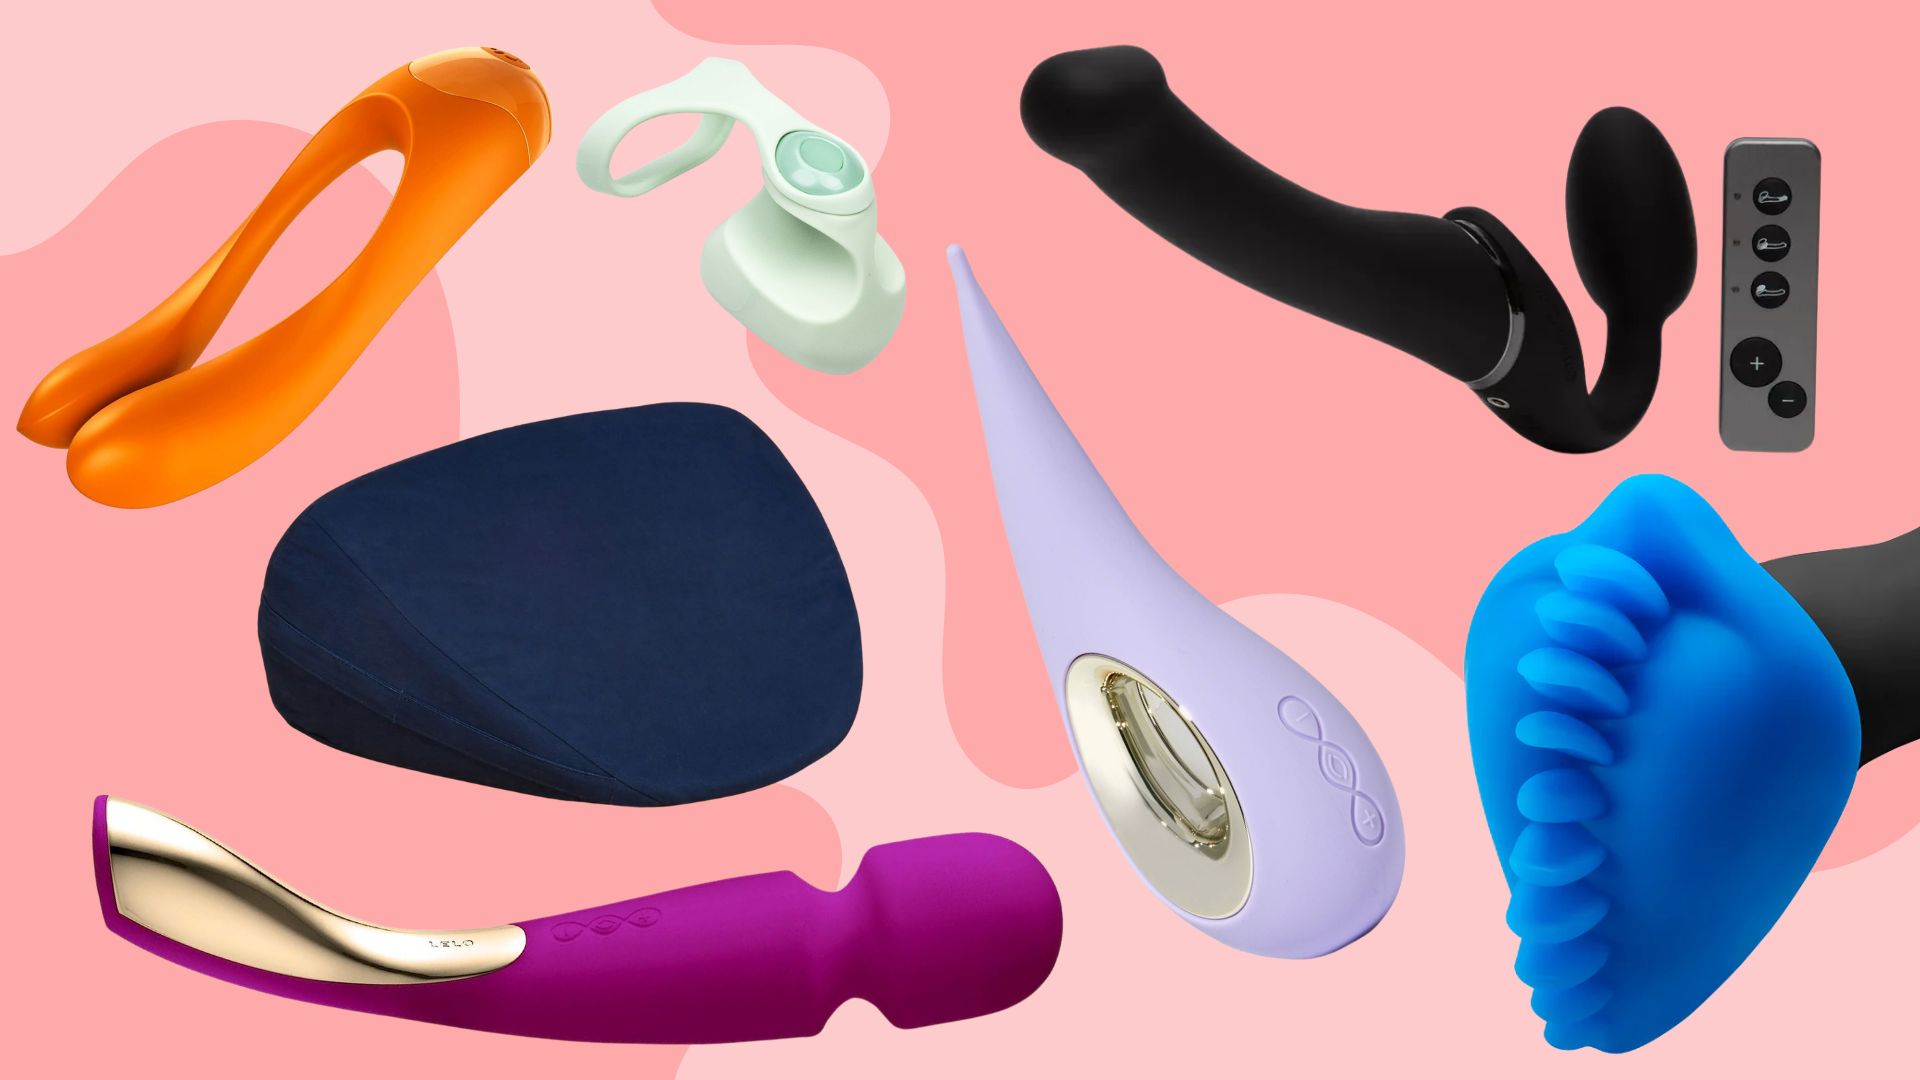 14 lesbian sex toys, dildos, and vibrators tested by us Woman and Home photo